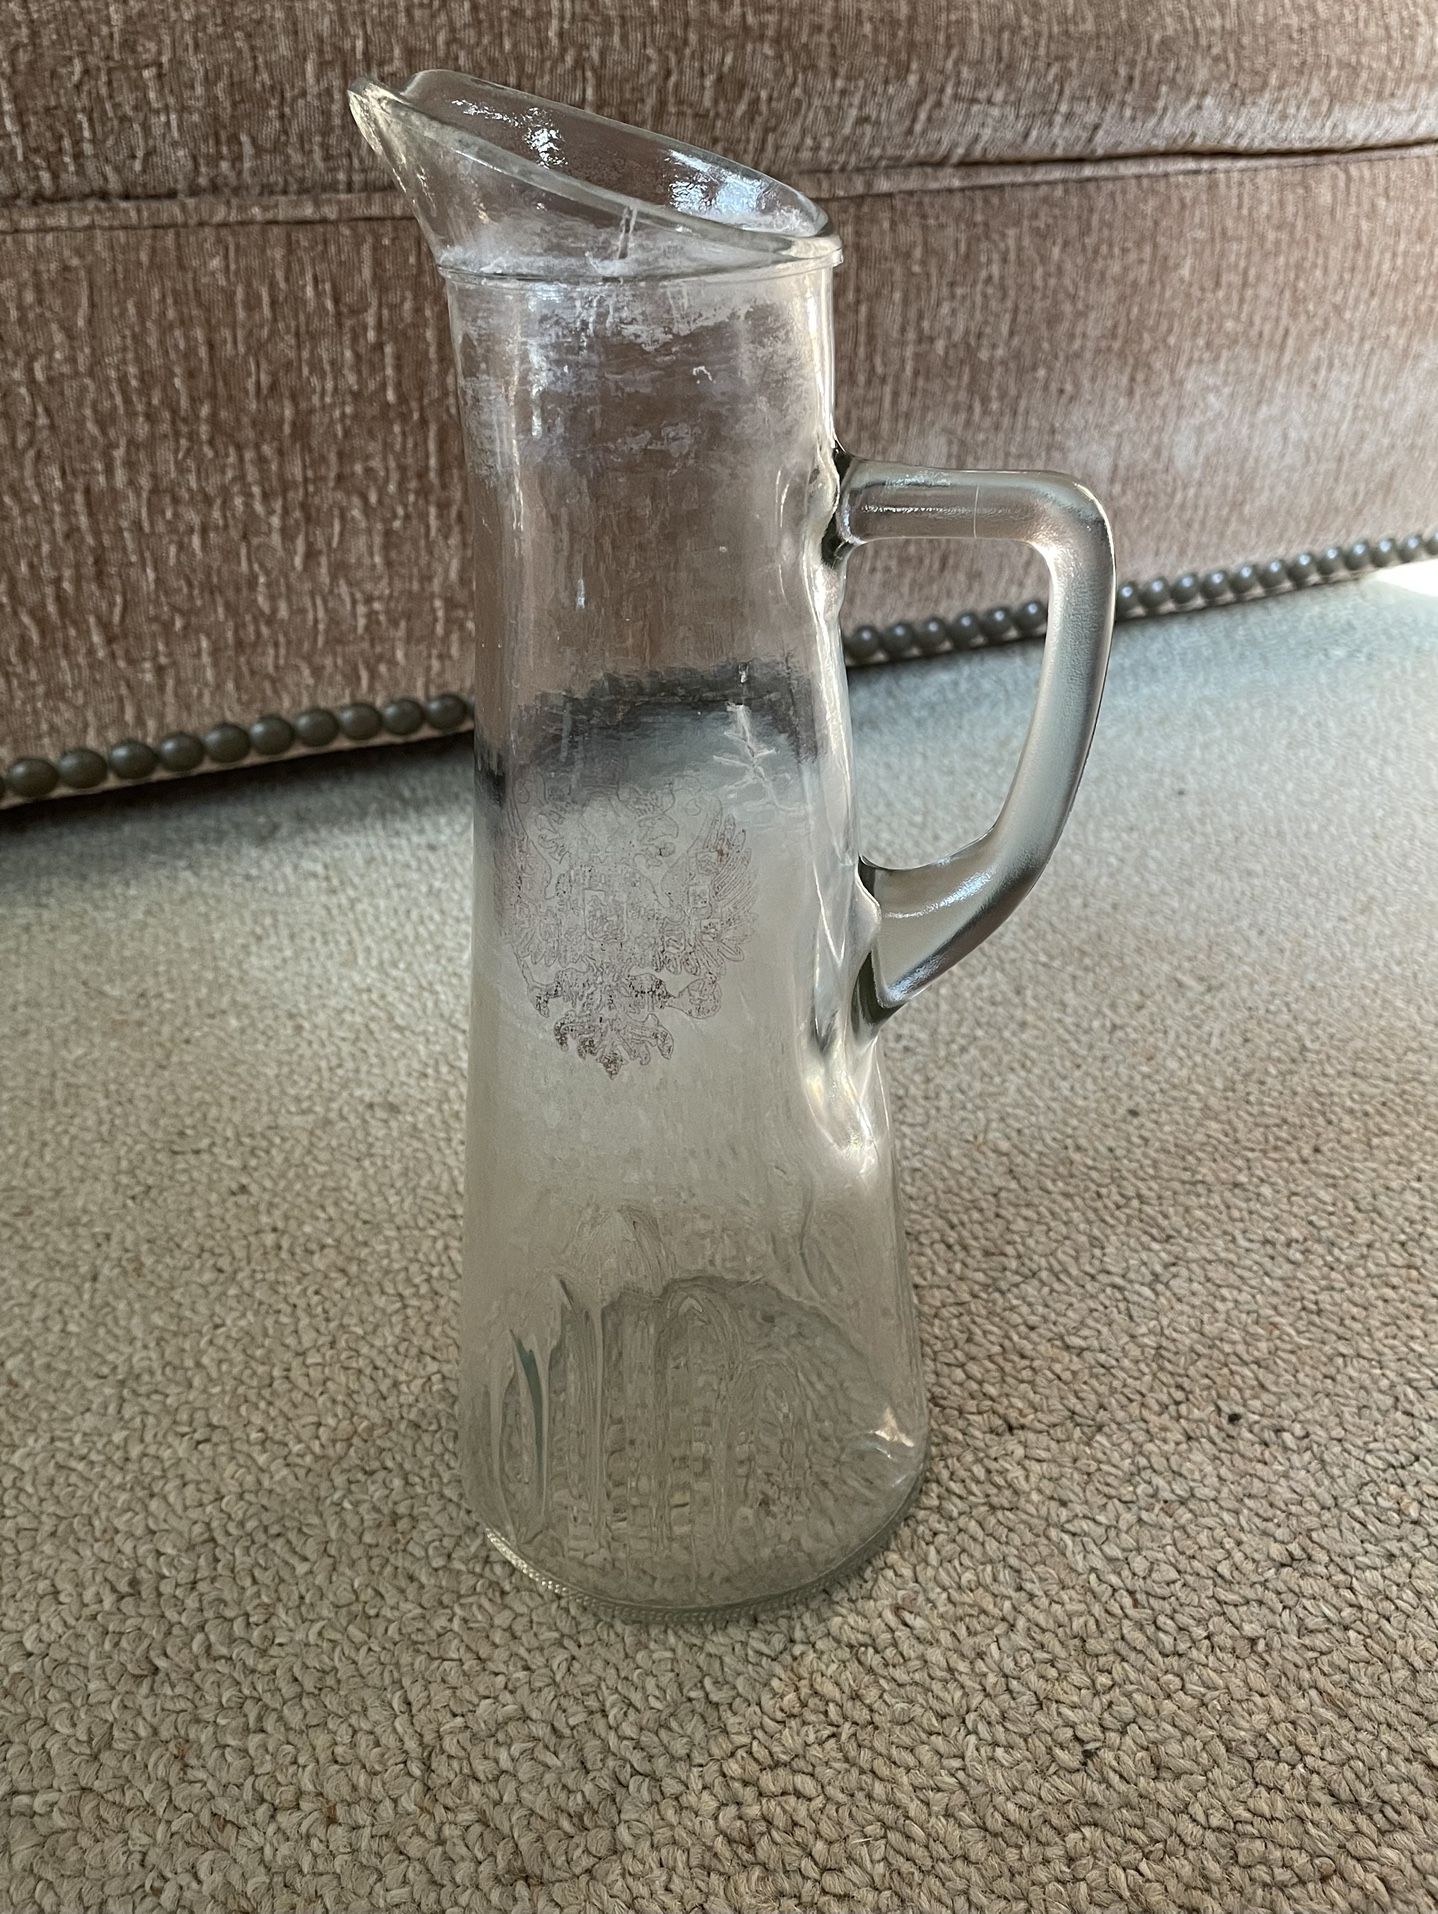 Prohibition Glass Pitcher "Federal Law Forbids Sale Or Re-use Of This Bottle"